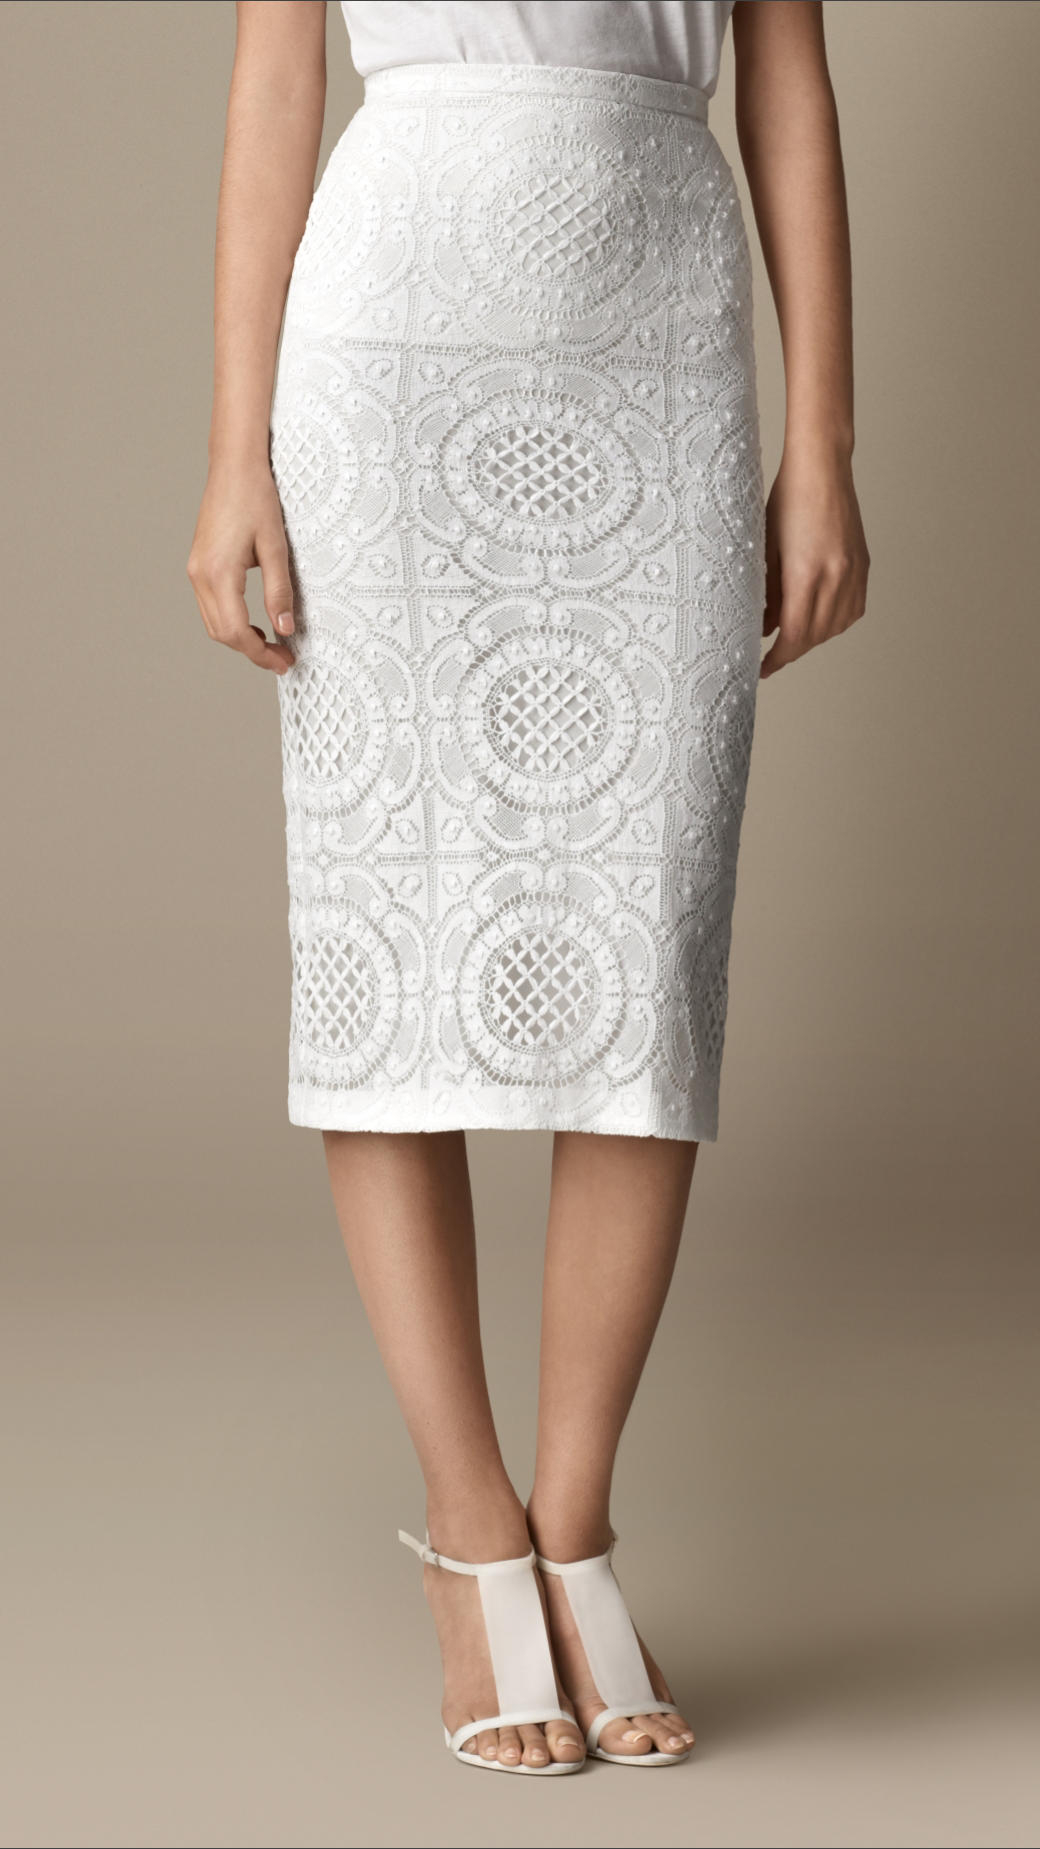 Burberry Lace Pencil Skirt in White - Lyst